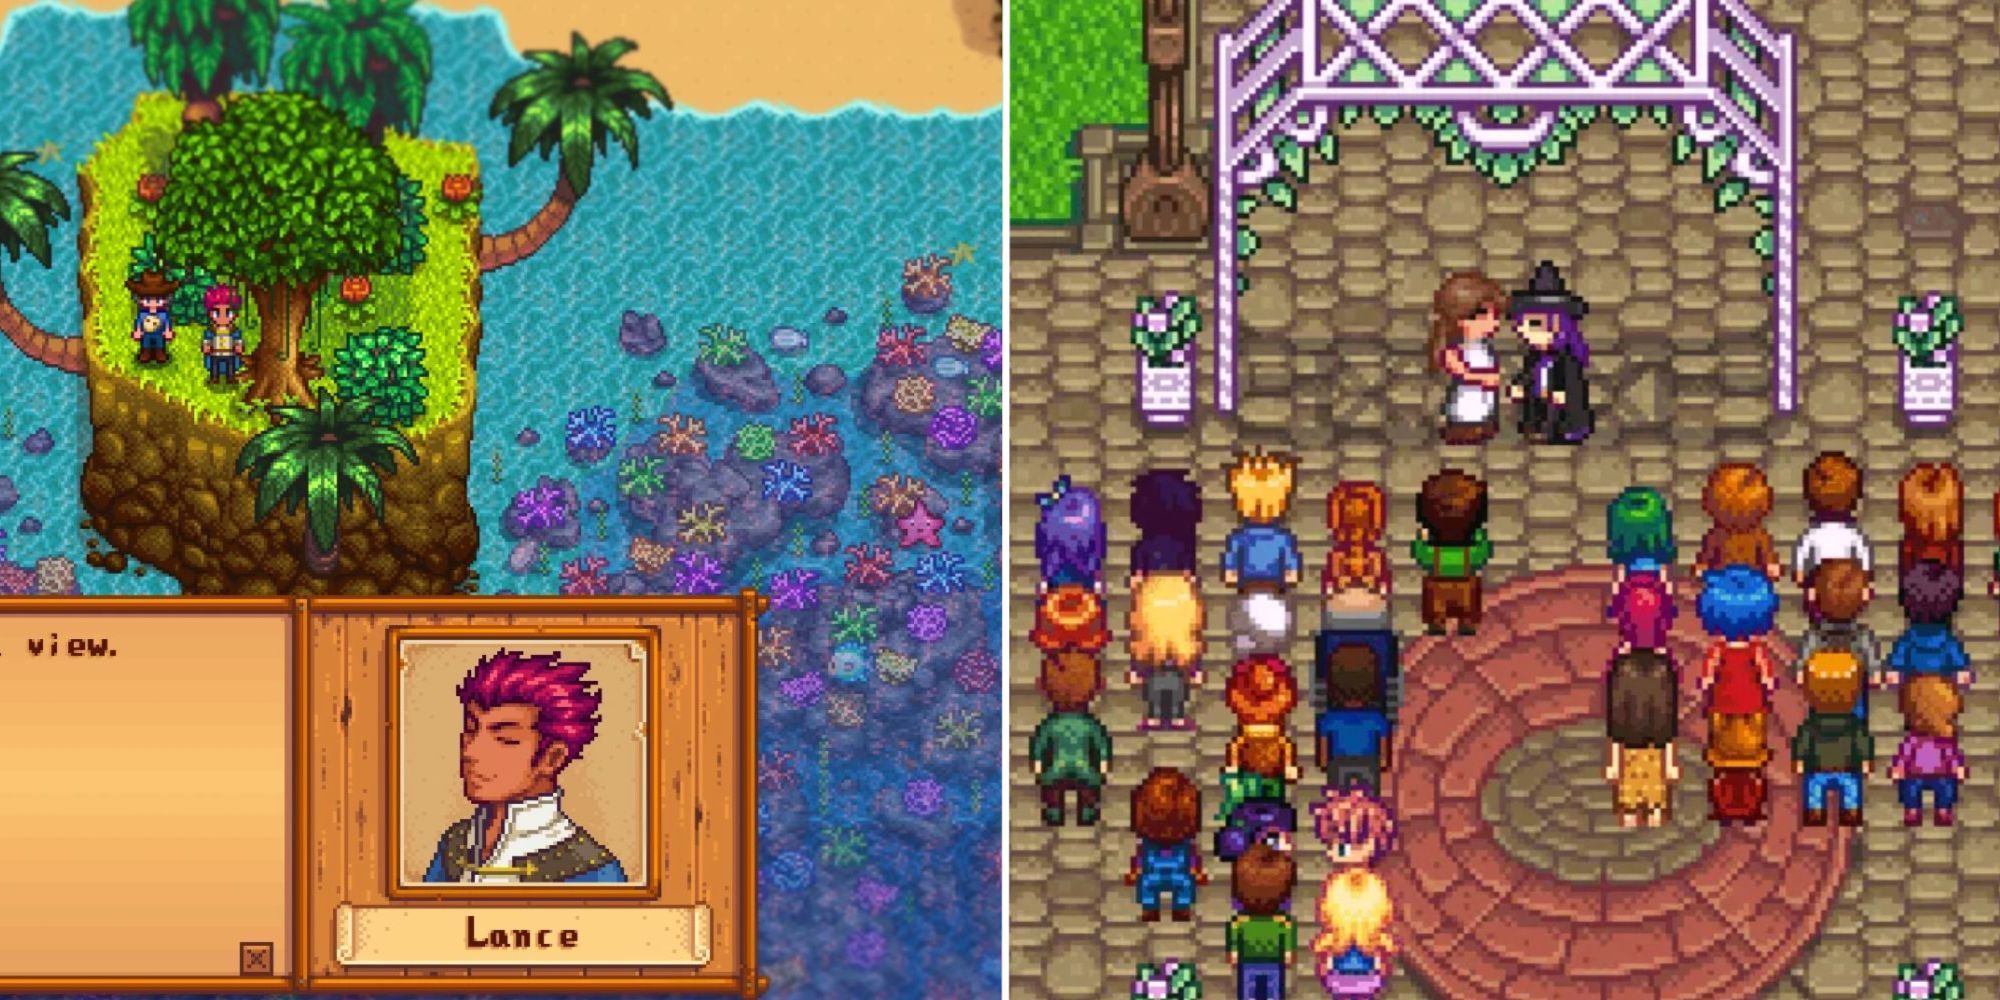 Stardew Valley modded character Lance, beside a farmer marrying the purple haired wizard Rasmodius